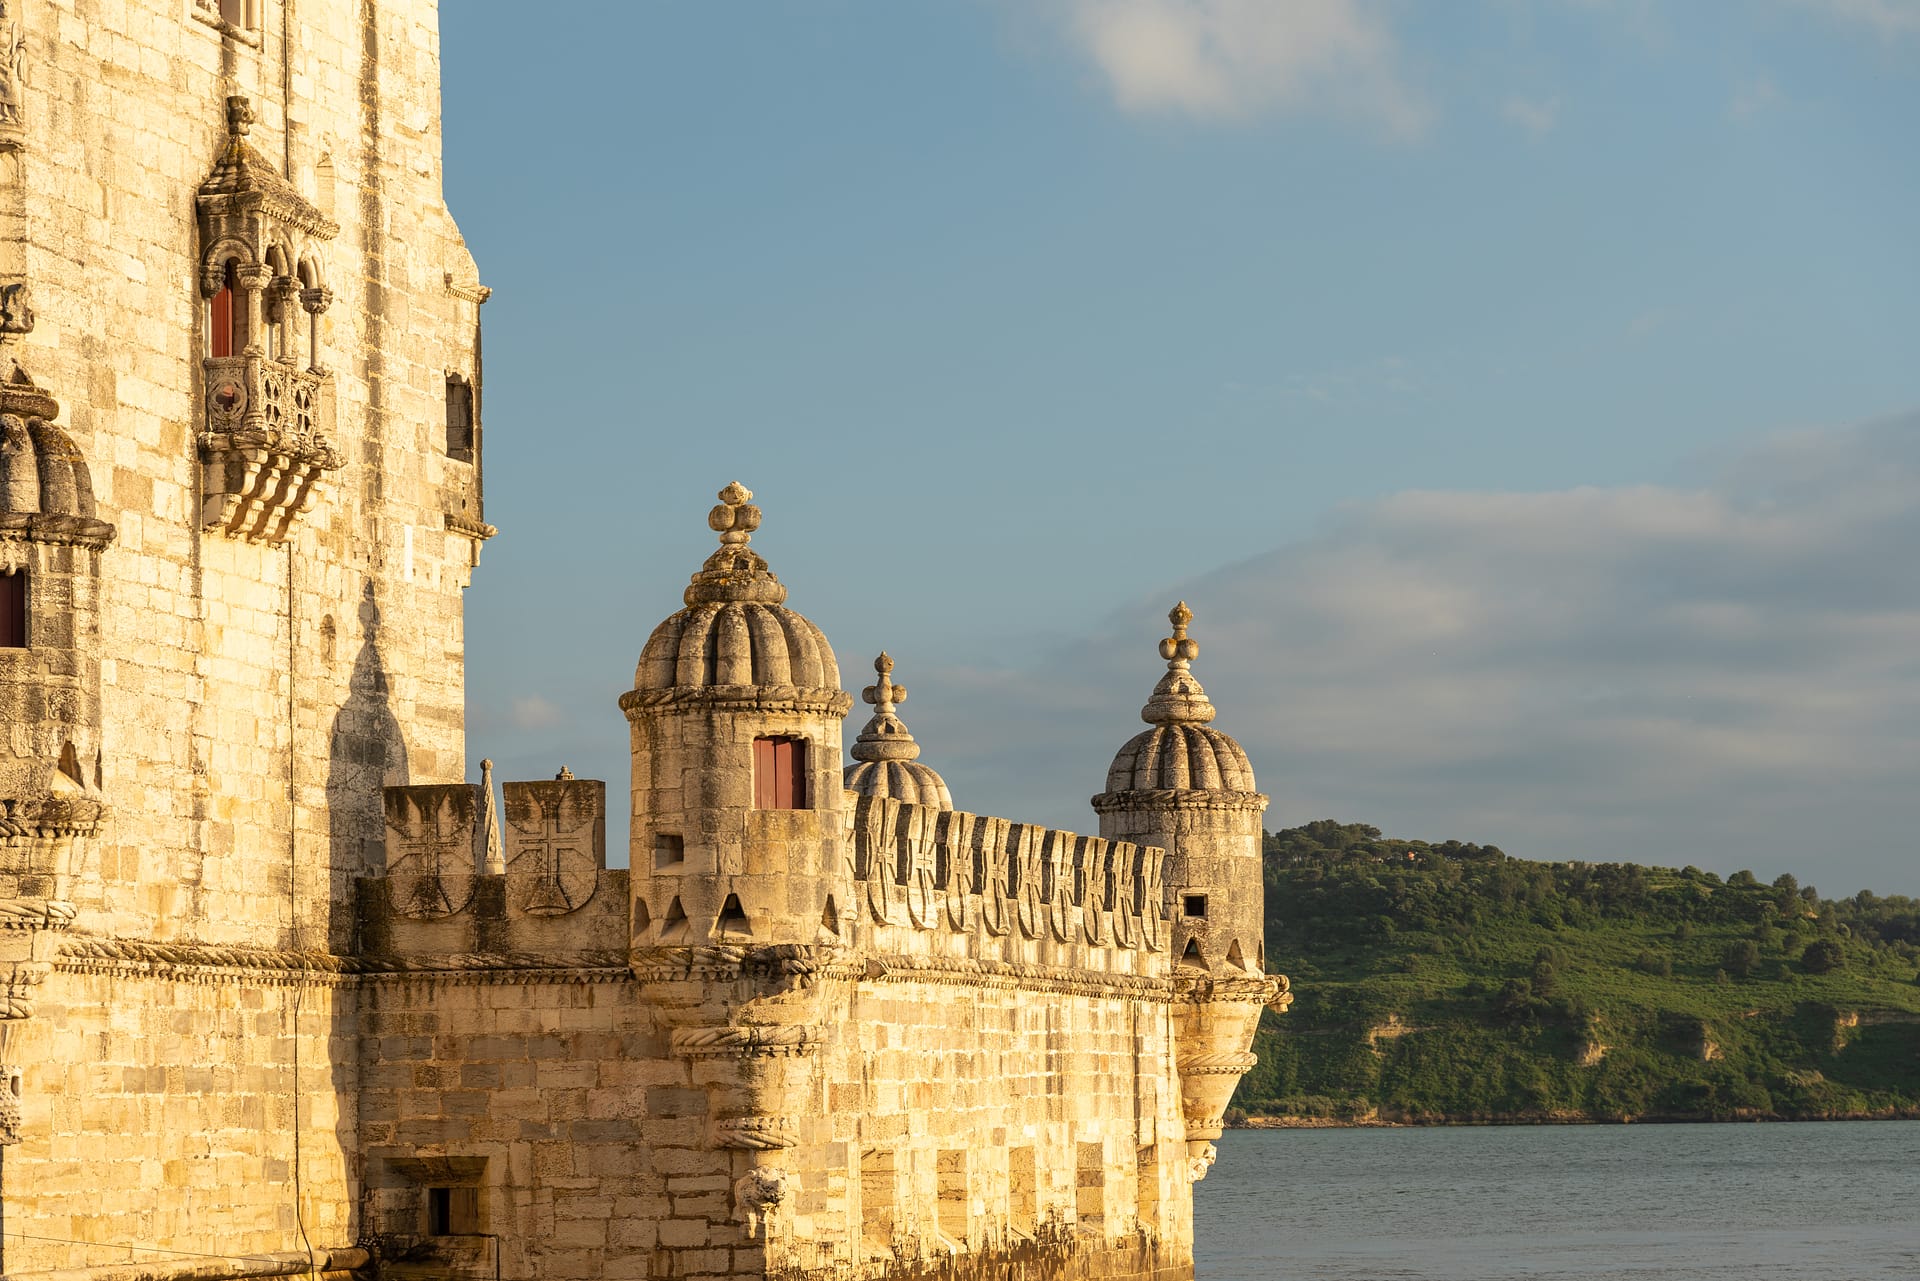 view of Belem tower in lisbon, Portugal at sunset